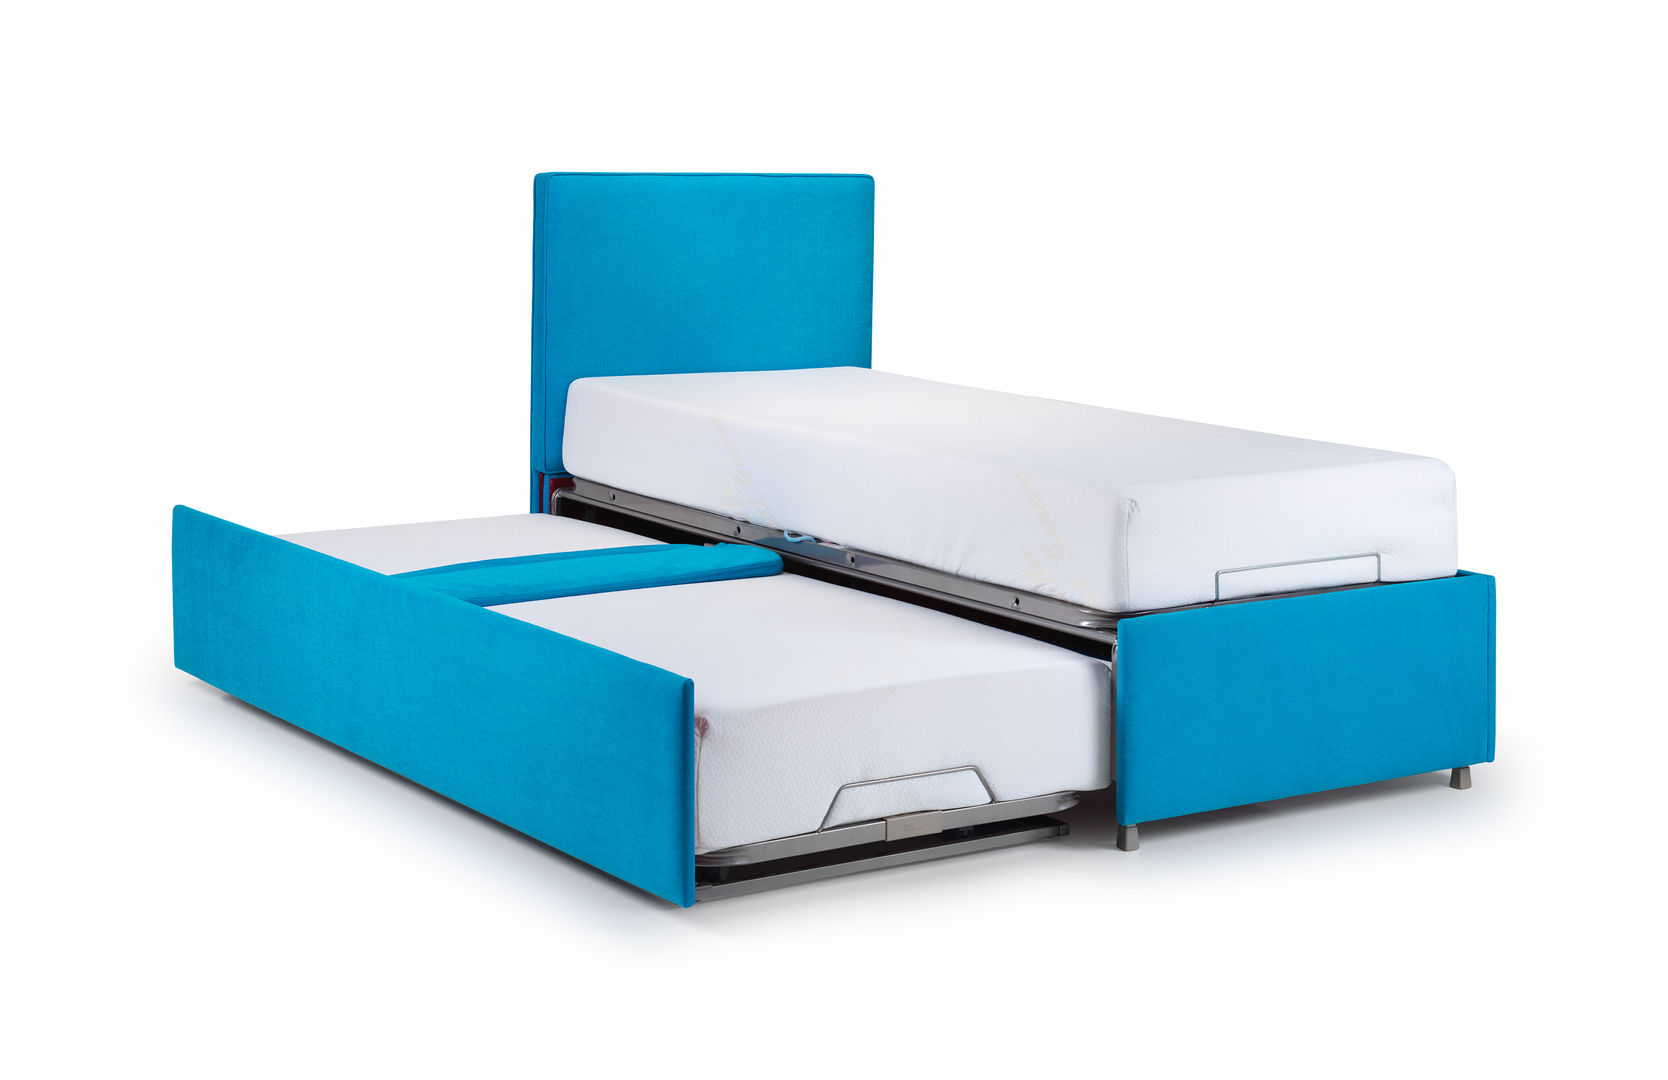 Ottoman, THE STORAGE BED THE STORAGE BED Modern style bedroom Beds & headboards